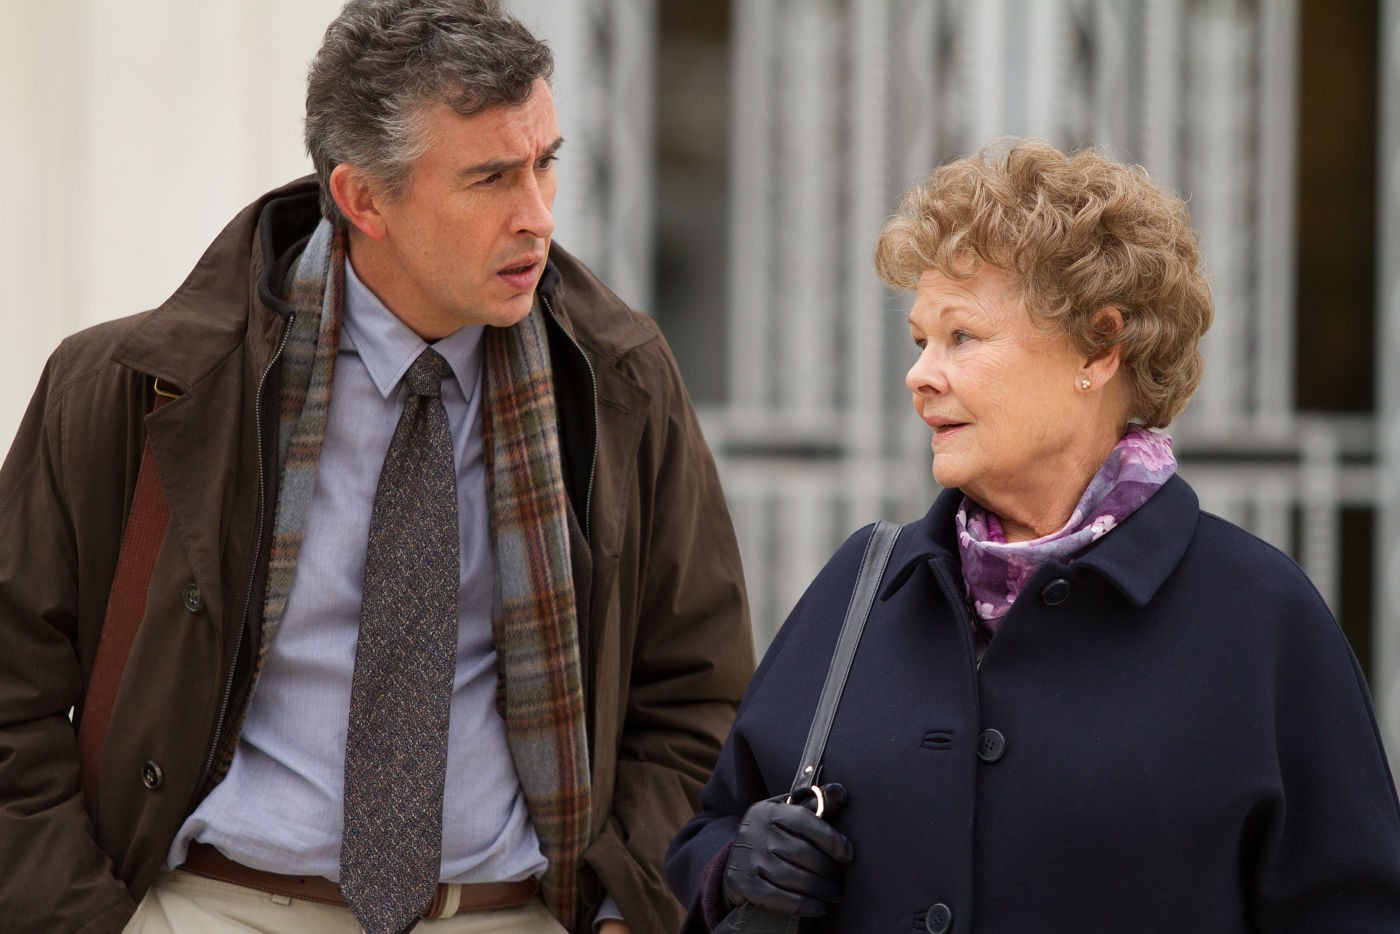 Steve Coogan stars as Martin Sixsmith and Judi Dench stars as Philomena Lee in The Weinstein Company's Philomena (2013)